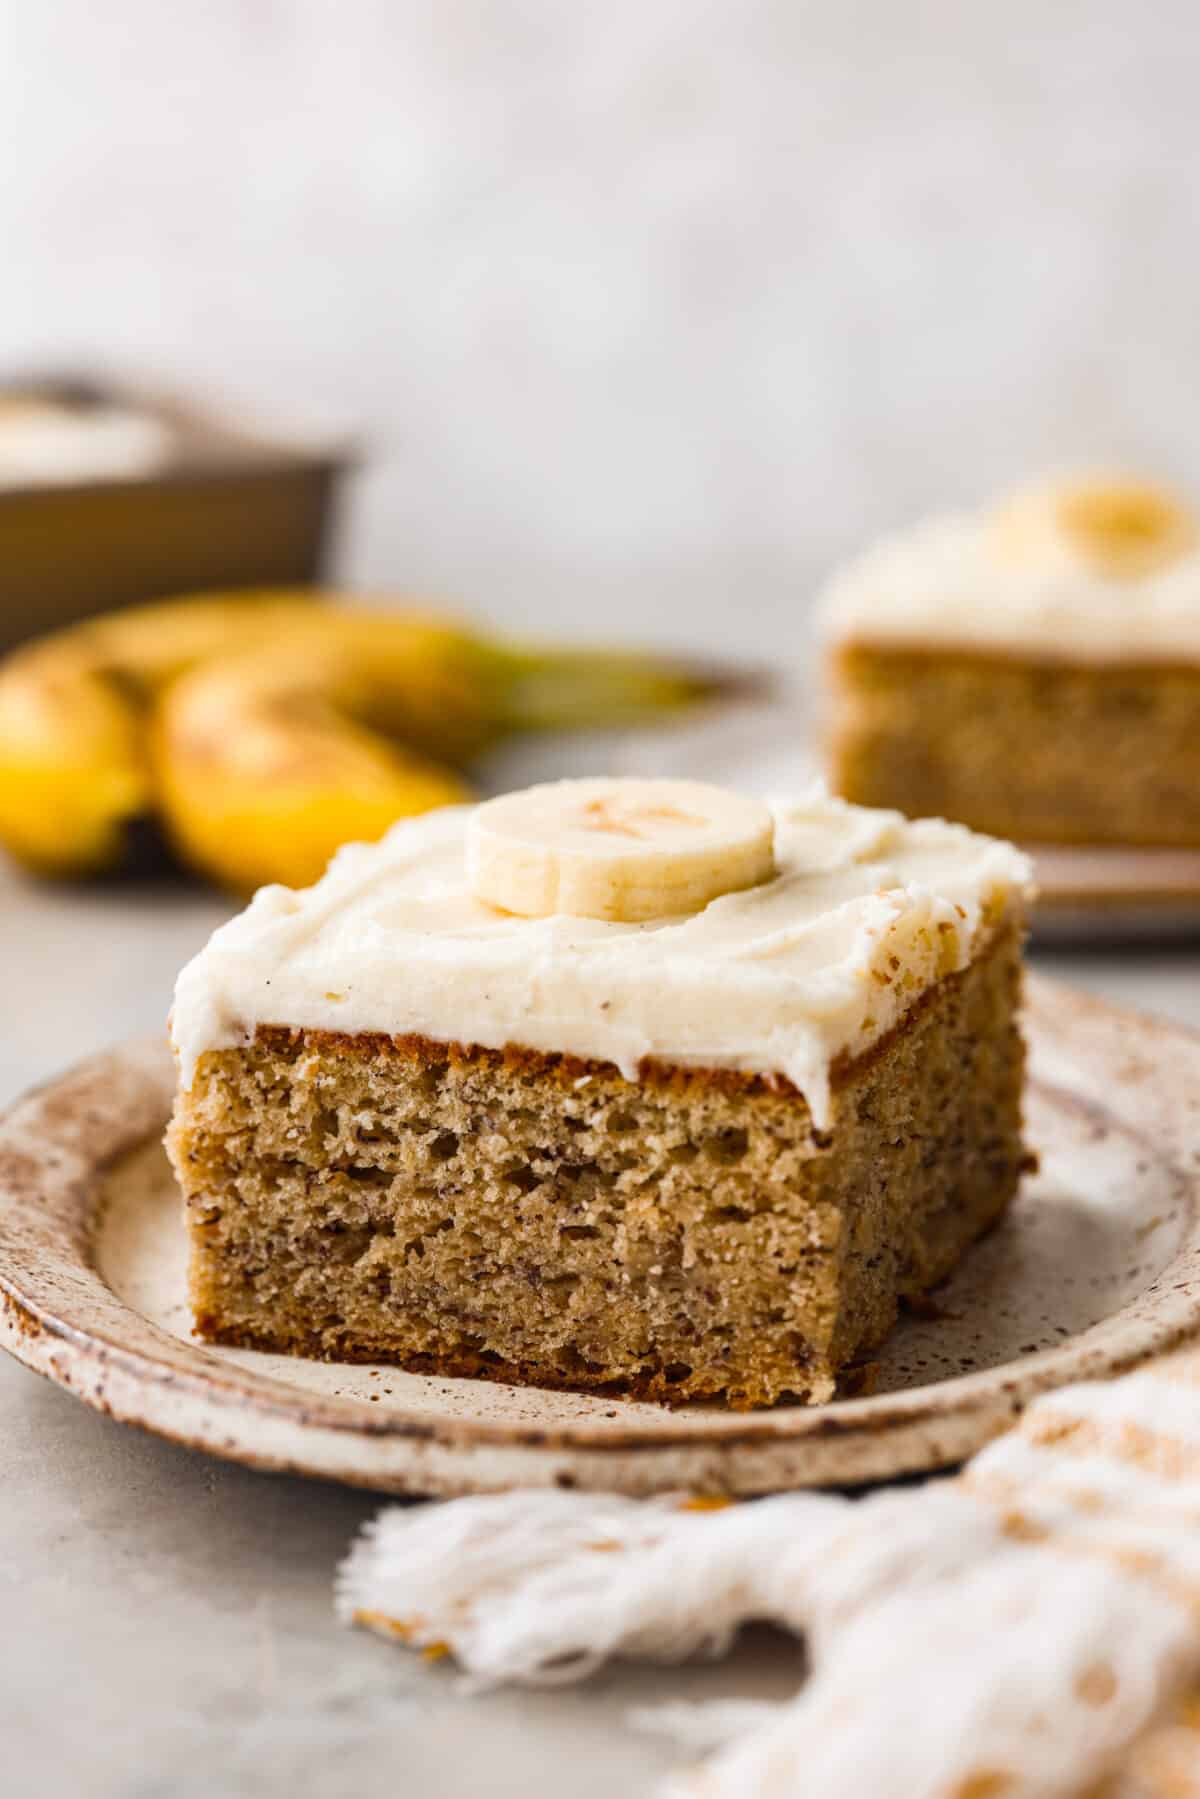 A slice of banana cake with cream cheese frosting.